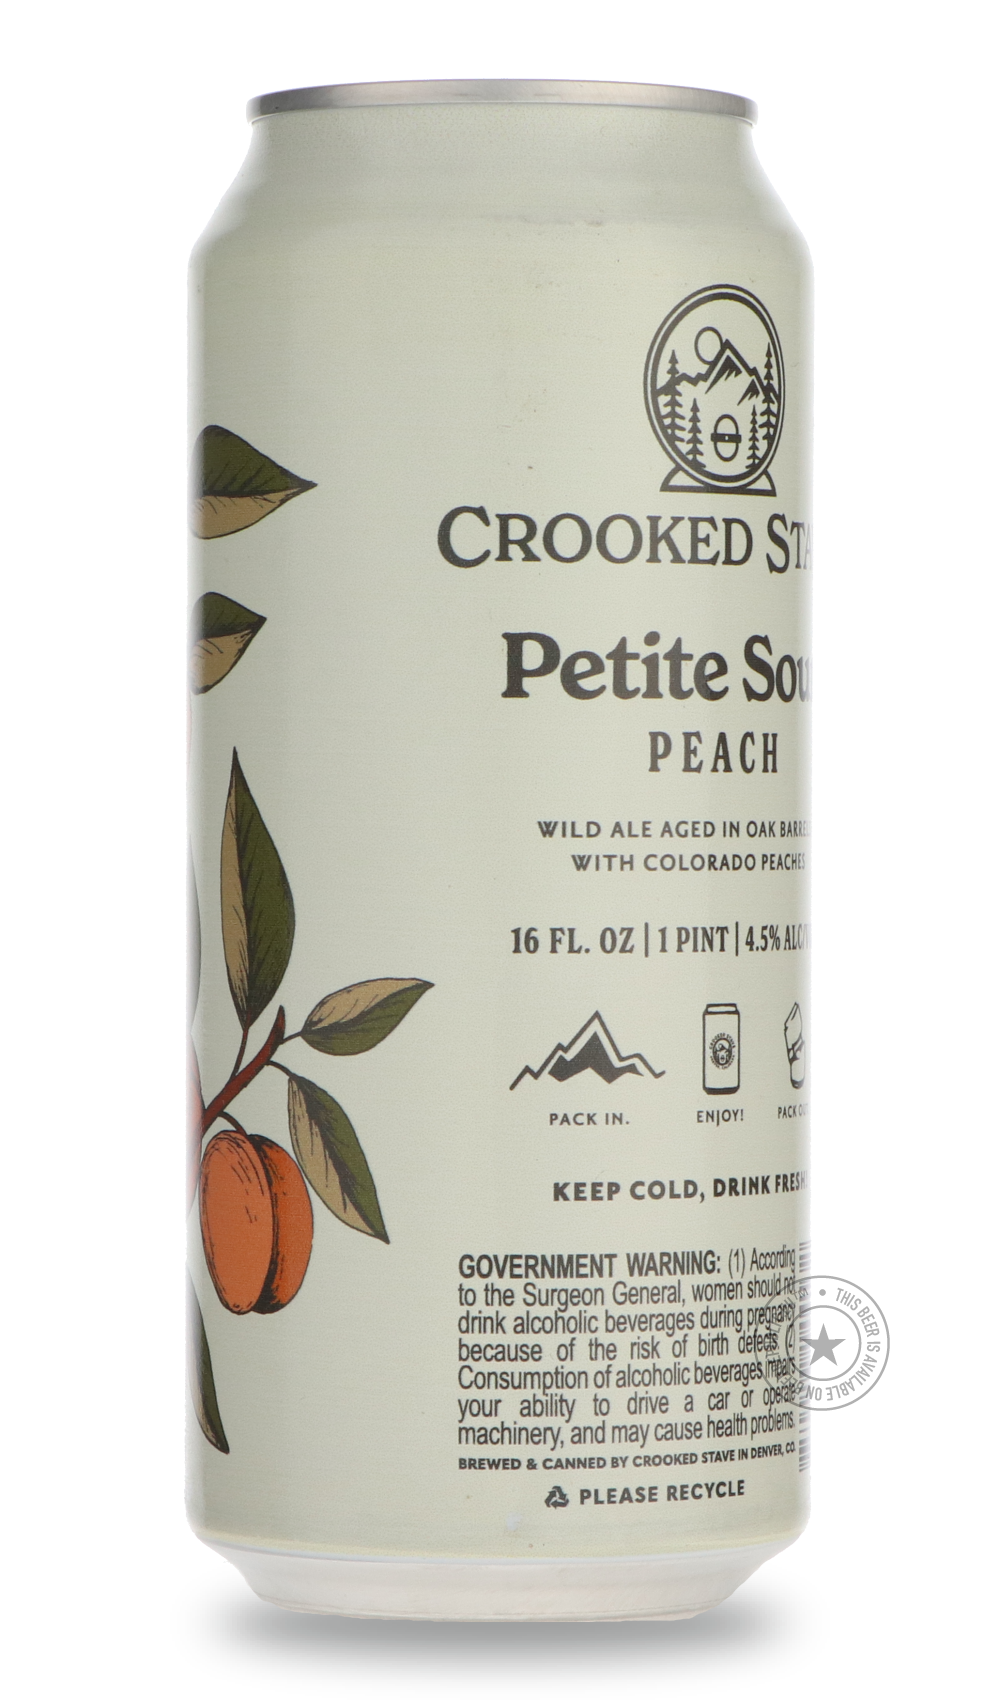 -Crooked Stave- Petite Sour Peach-Sour / Wild & Fruity- Only @ Beer Republic - The best online beer store for American & Canadian craft beer - Buy beer online from the USA and Canada - Bier online kopen - Amerikaans bier kopen - Craft beer store - Craft beer kopen - Amerikanisch bier kaufen - Bier online kaufen - Acheter biere online - IPA - Stout - Porter - New England IPA - Hazy IPA - Imperial Stout - Barrel Aged - Barrel Aged Imperial Stout - Brown - Dark beer - Blond - Blonde - Pilsner - Lager - Wheat -